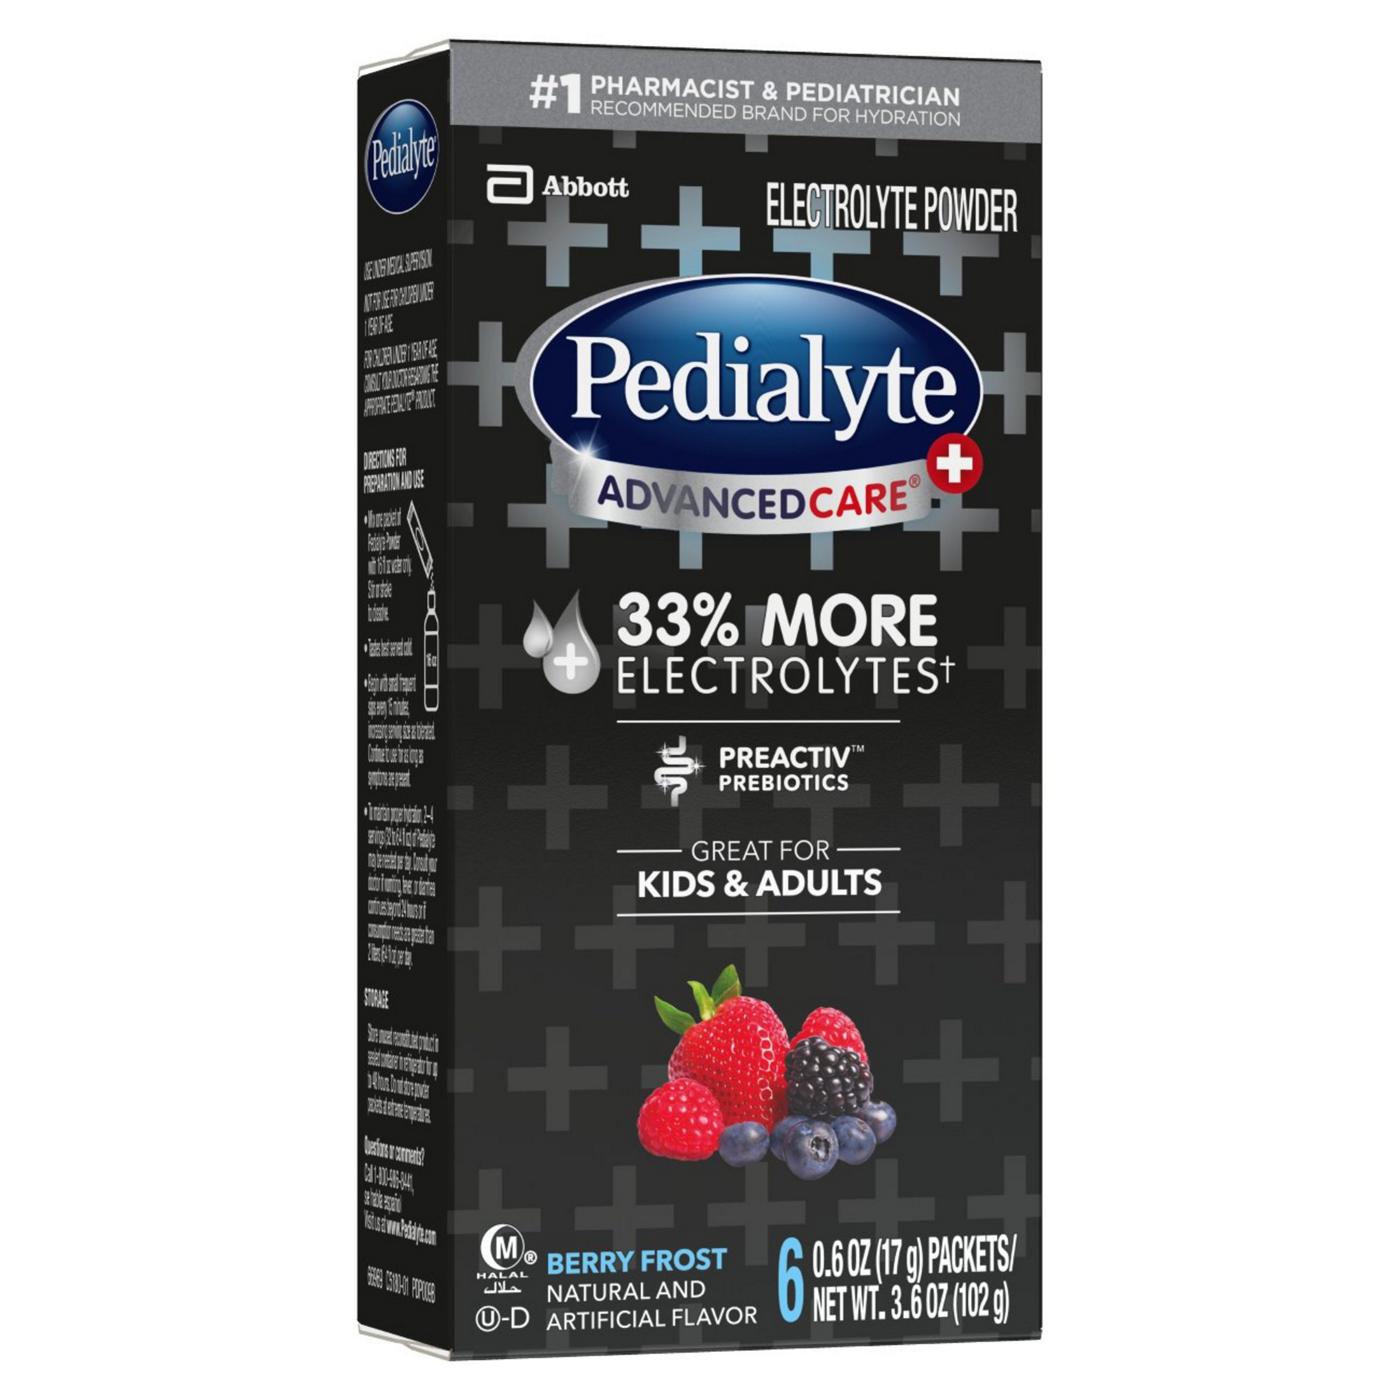 Pedialyte AdvancedCare Plus Electrolyte Powder Packs - Berry Frost; image 2 of 7